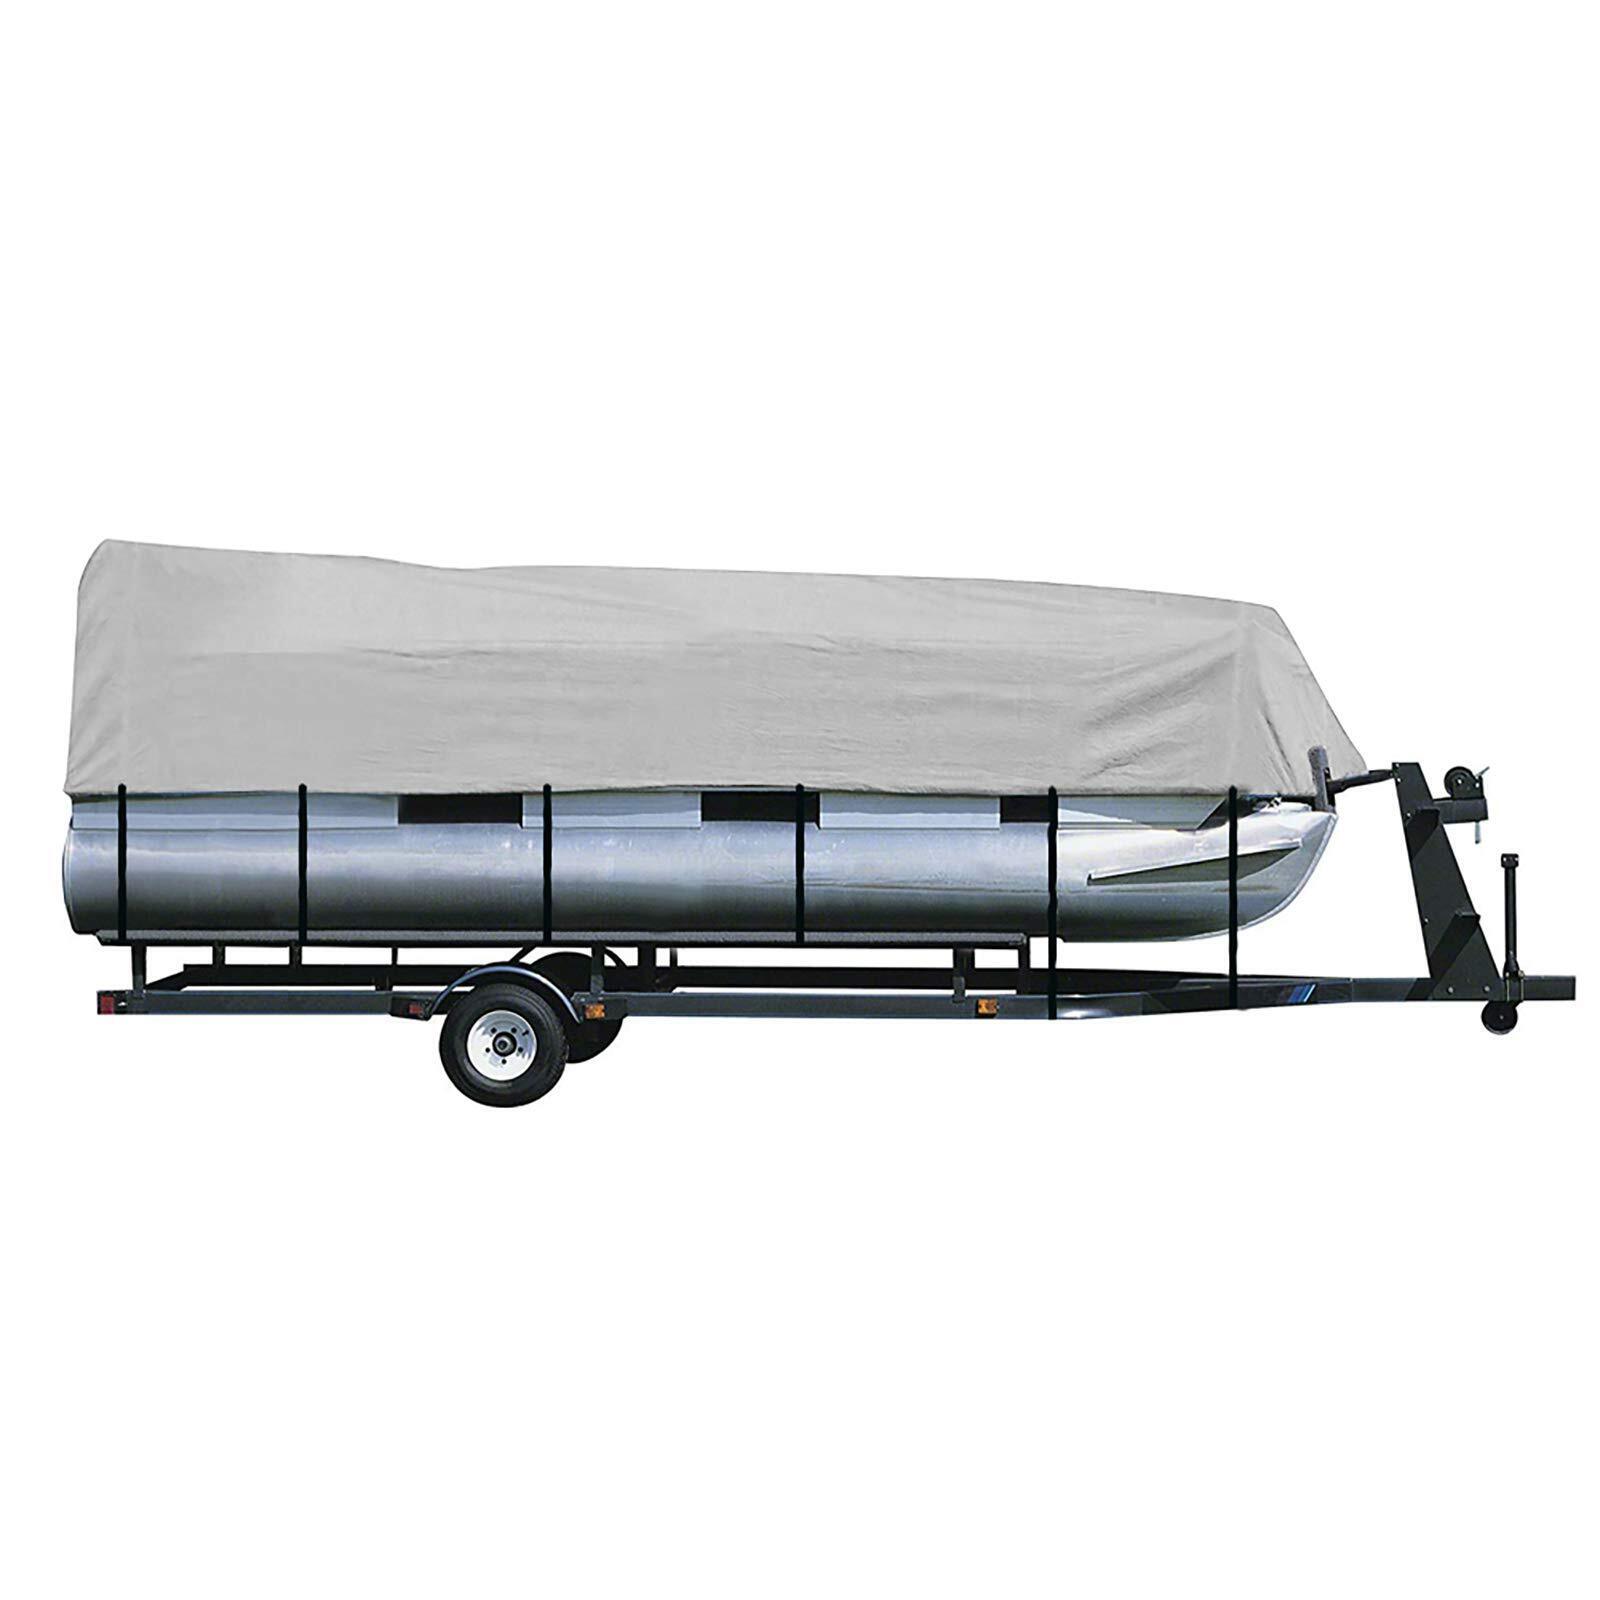 iCOVER Trailerable Pontoon Boat Cover, Heavy Duty Fits 25 to 28ft Long & Beam...